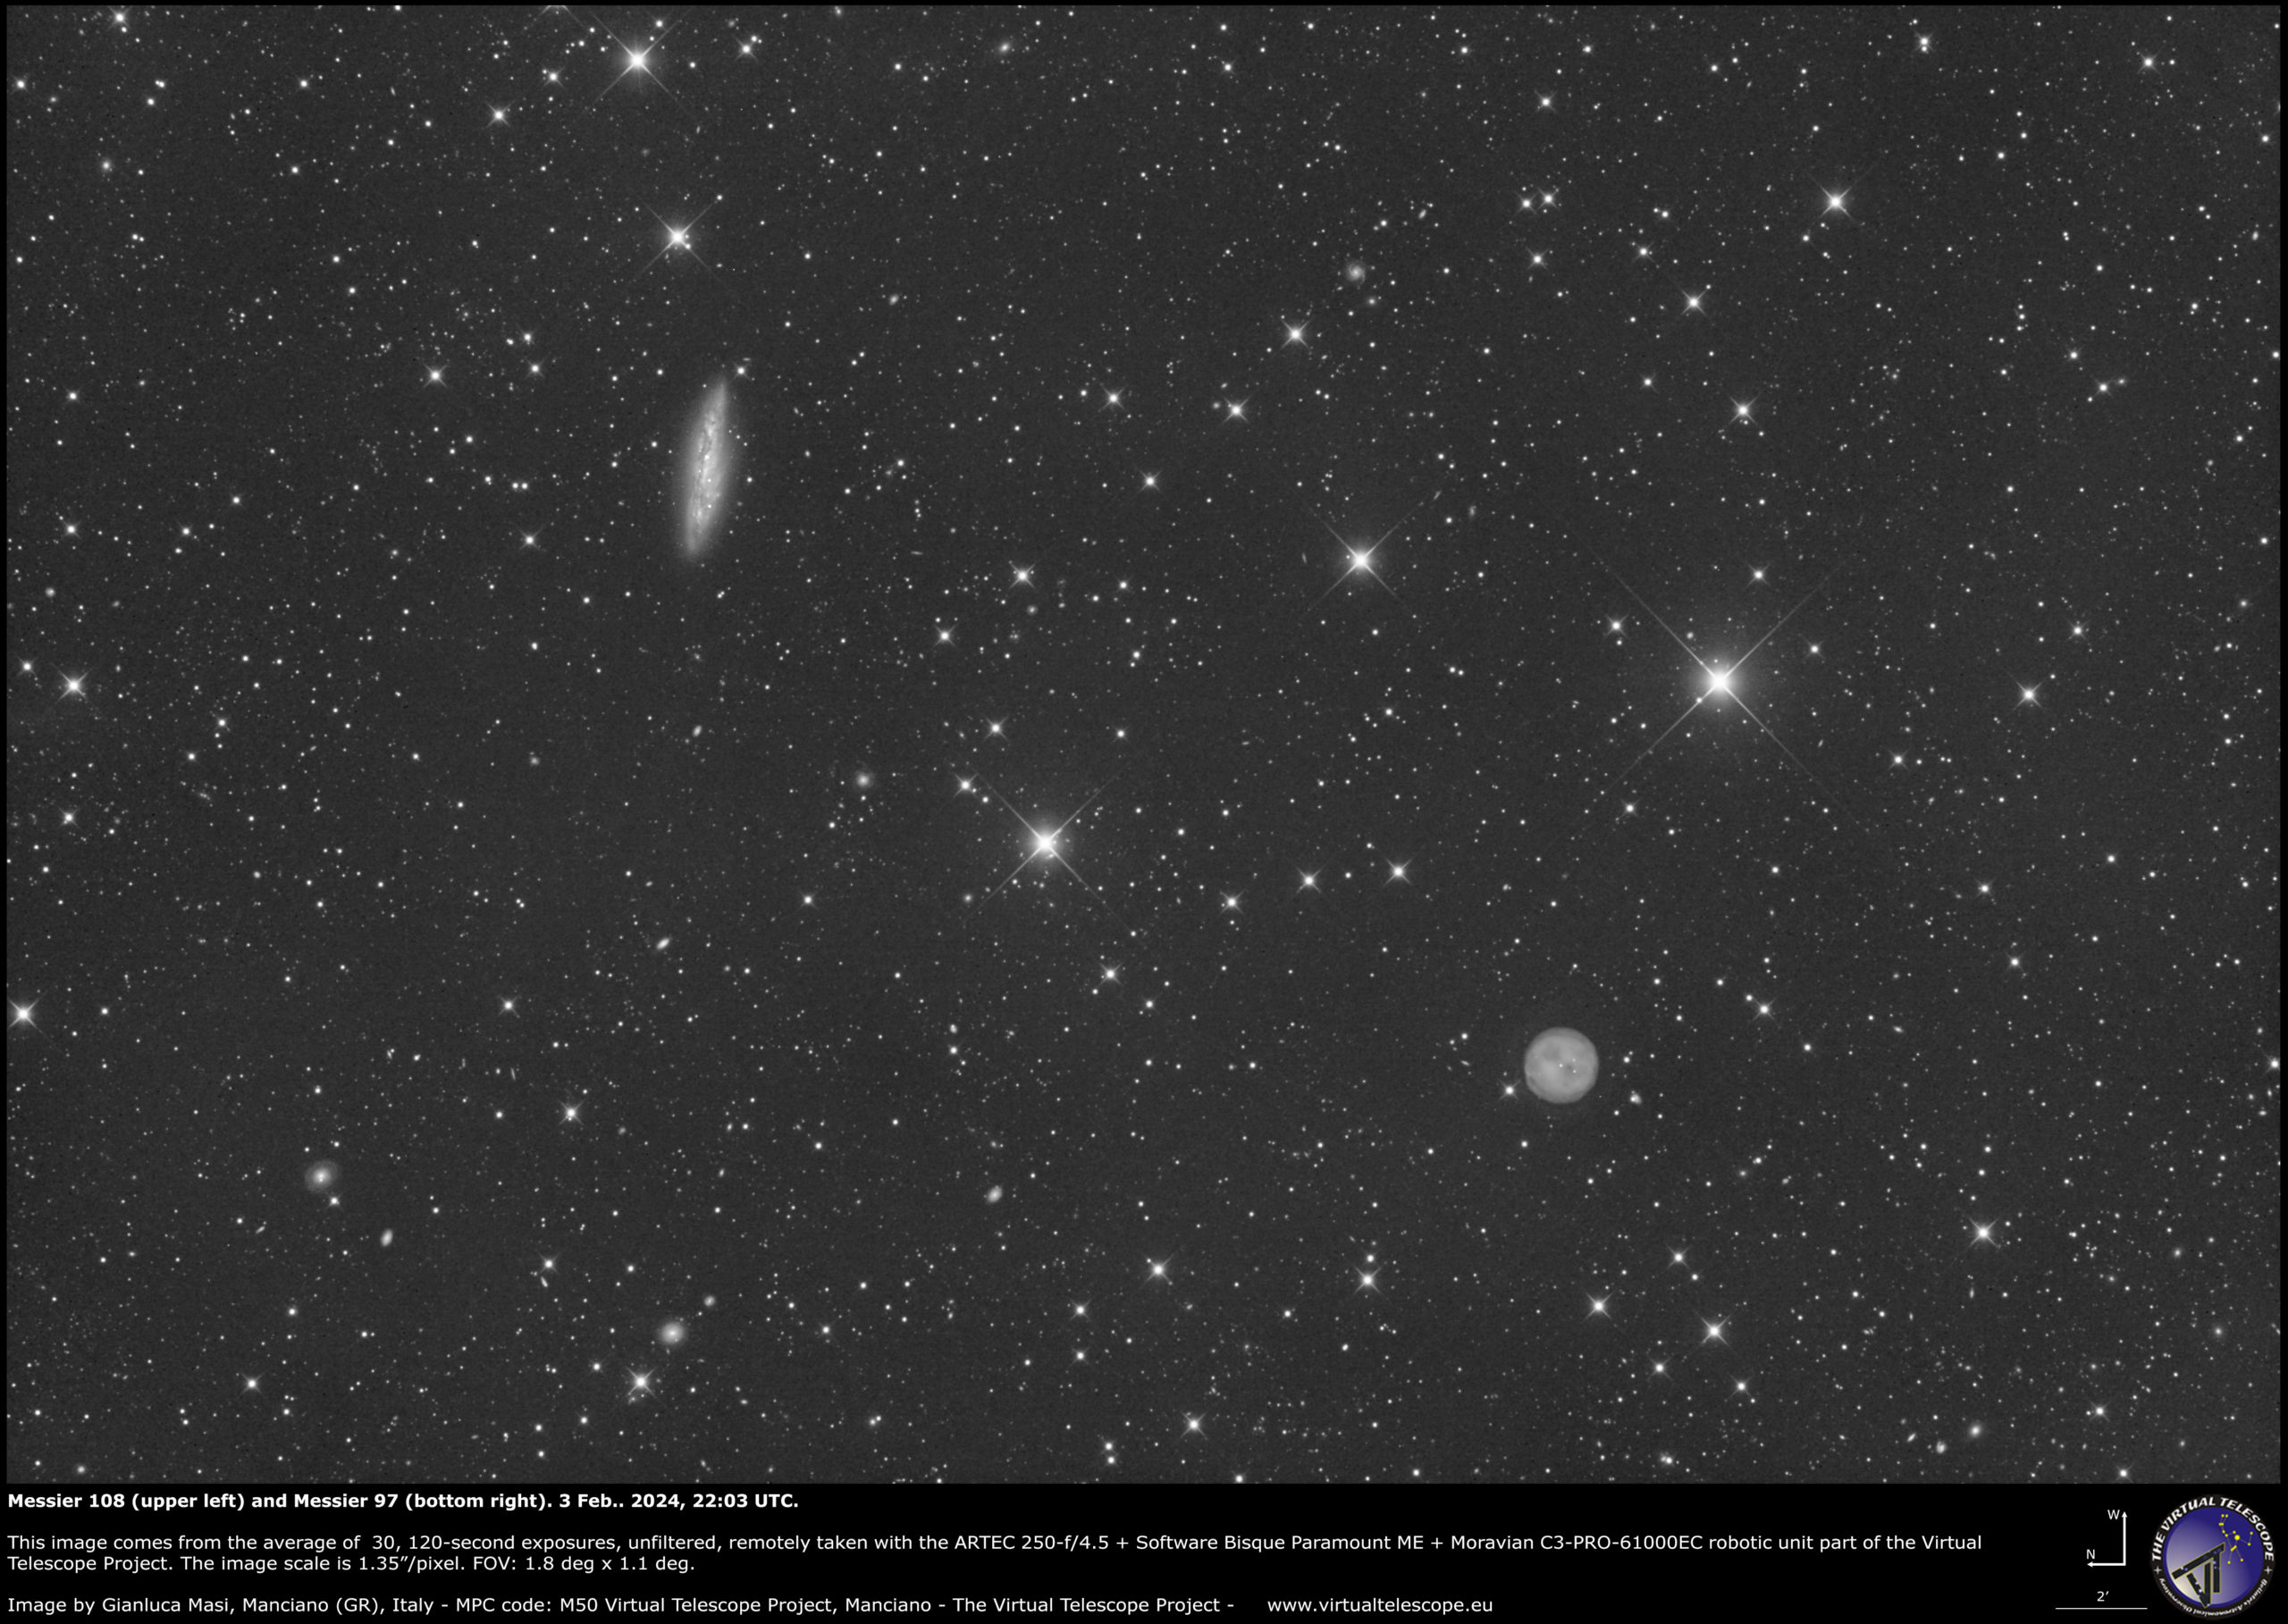 Messier 108 and Messier 97. 3 Feb. 2024.